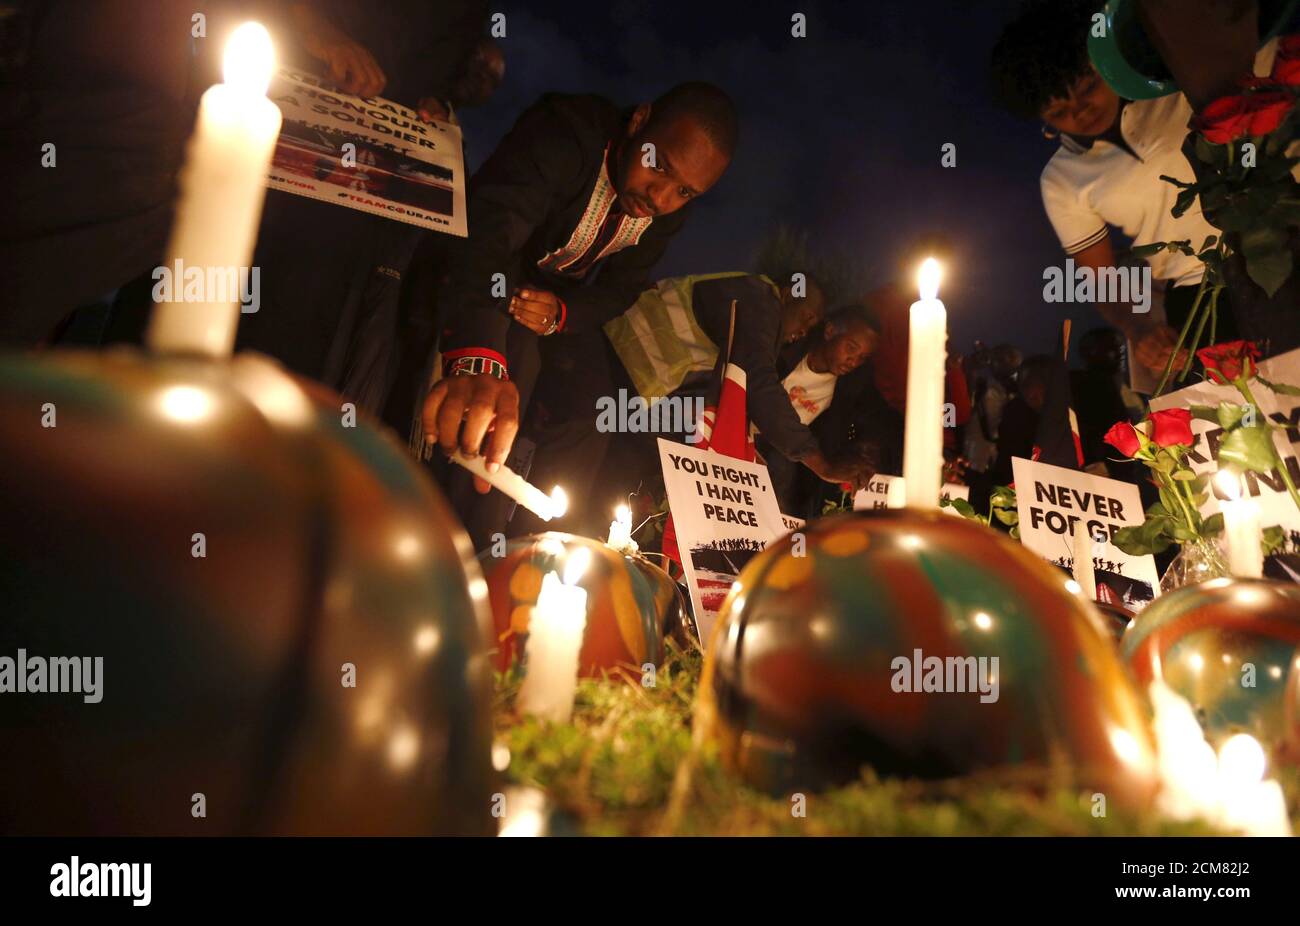 Kenyan activist Boniface Mwangi lights a candle near a replica of a gun and helmets placed on the ground to symbolise Kenyan soldiers serving in the African Union Mission in Somalia (AMISOM), who were killed during an attack last week, at a memorial vigil within the 'Freedom Corner' in Kenya's capital Nairobi, January 21, 2016. Al Shabaab, which is aligned with al Qaeda, said its fighters killed more than 100 Kenyan soldiers when they overrun the base in Ceel Cadde, near the Kenyan border, on Jan 15. REUTERS/Thomas Mukoya Stock Photo